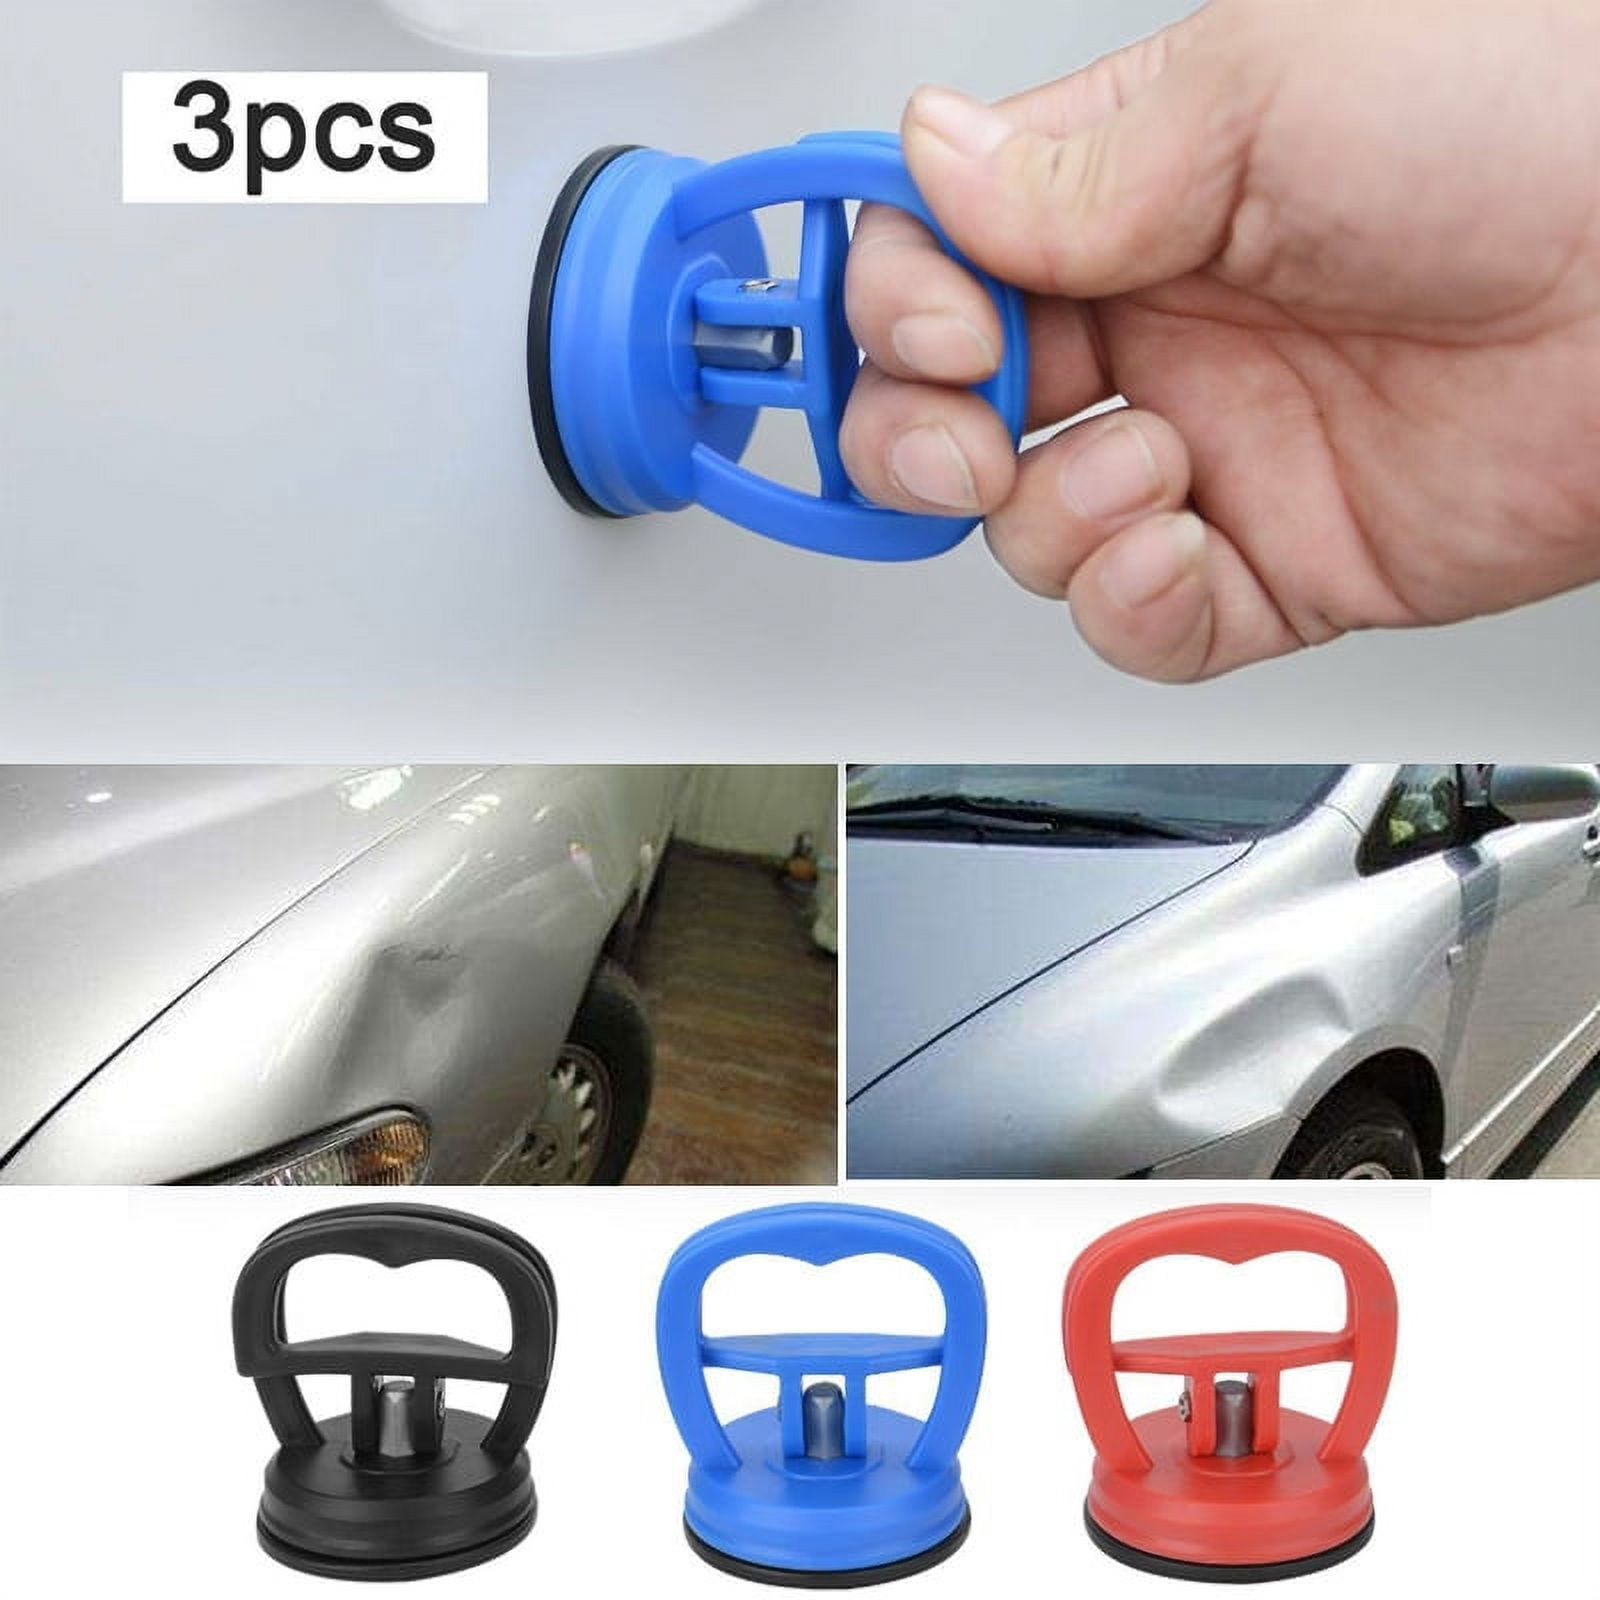 Dent Puller,dent Removal Kit,3 Pack Car Dent Puller Kit Handle  Lifter,powerful Car Dent Remover,suction Cup Dent Puller And Paintless Dent  Repair Kit